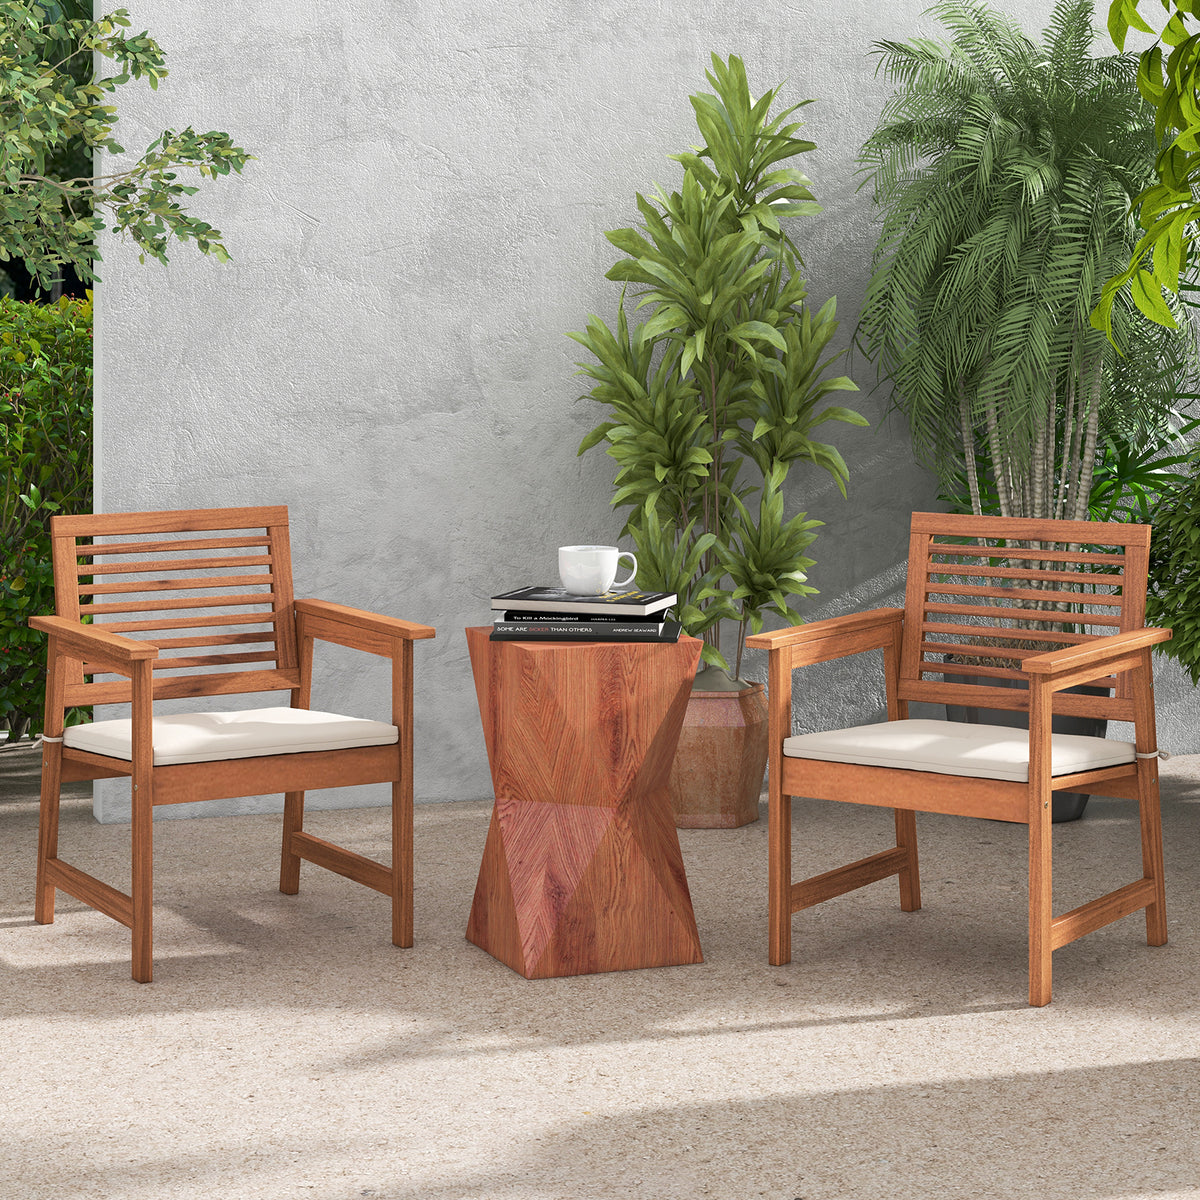 Set of 2 Patio Solid Wood Dining Chairs with Cushions and Slatted Seat